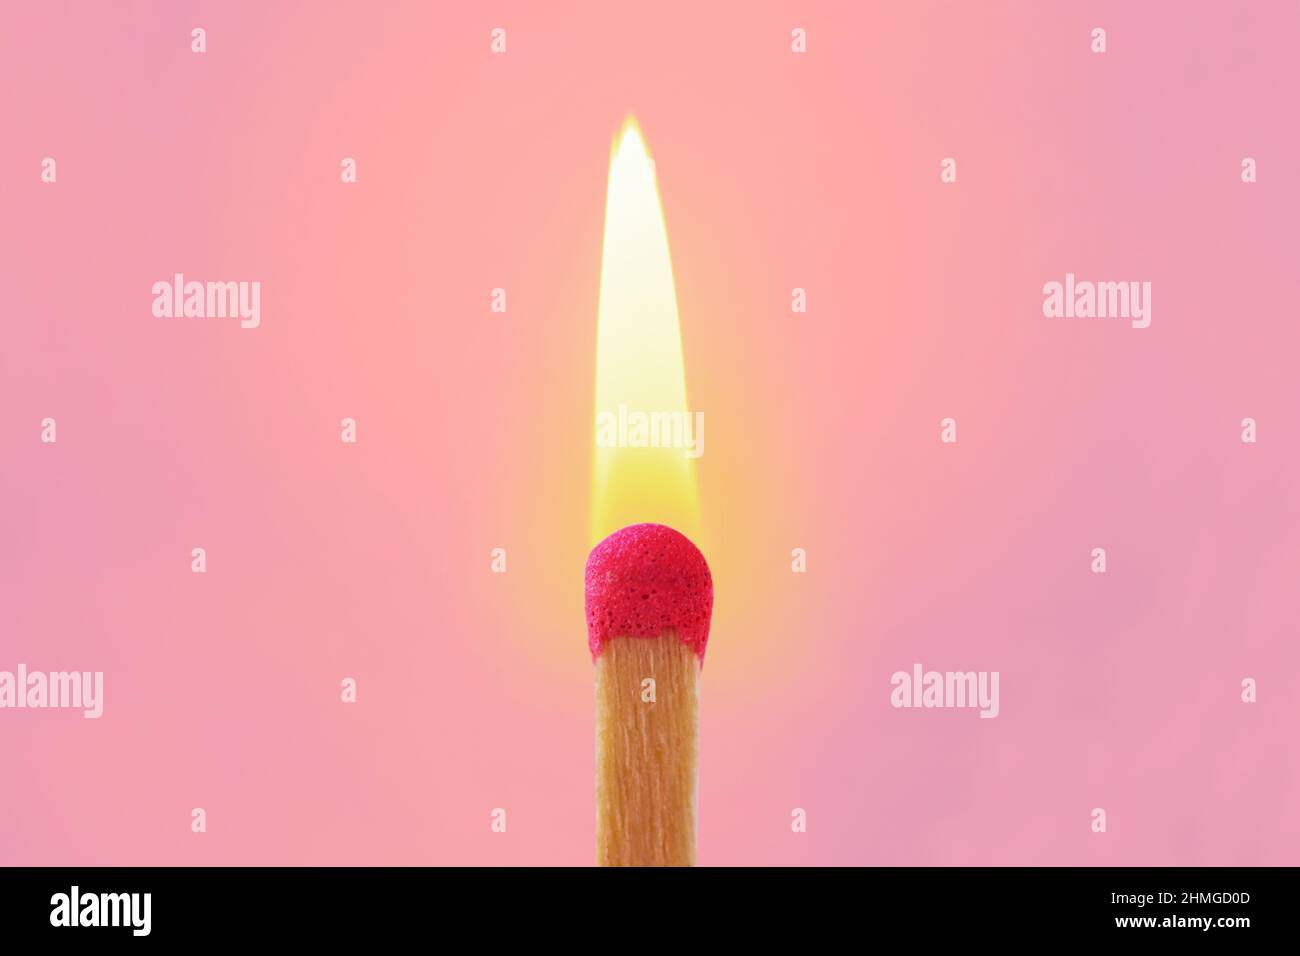 Pink match with flame on pink background - Concept of women and creative thinking Stock Photo